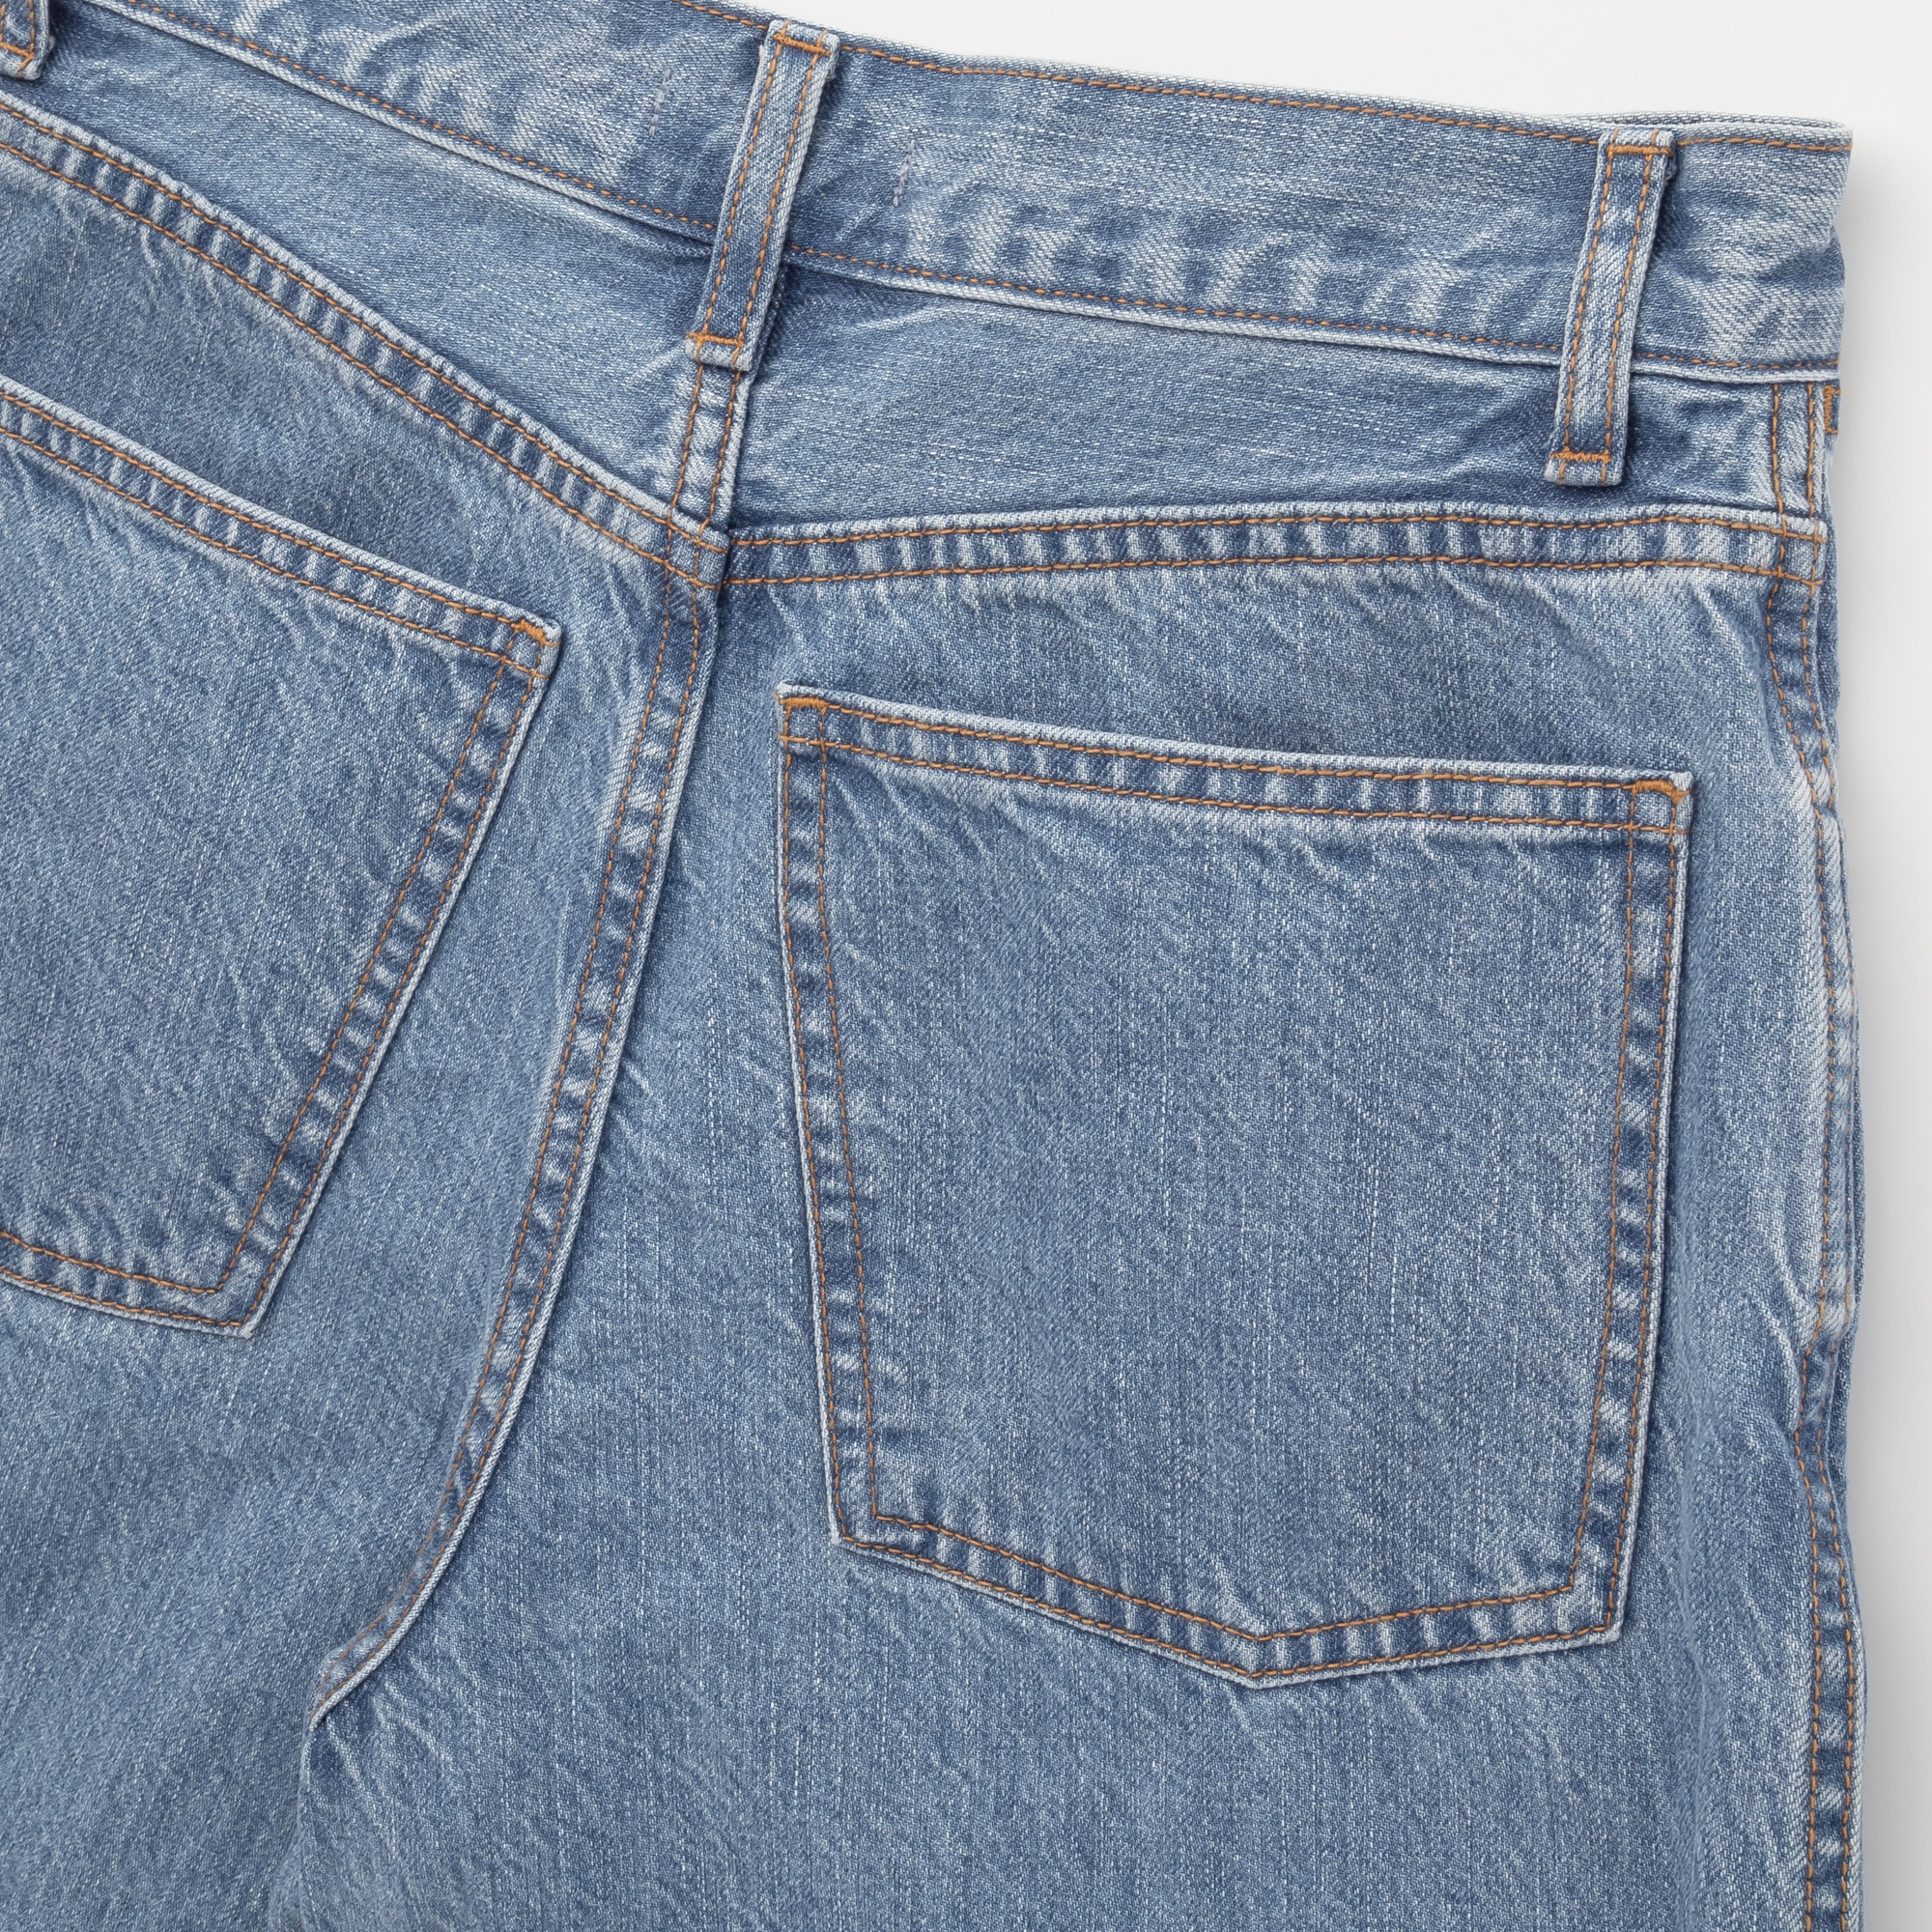 WOMEN U WIDE-FIT CURVED JEANS | UNIQLO US